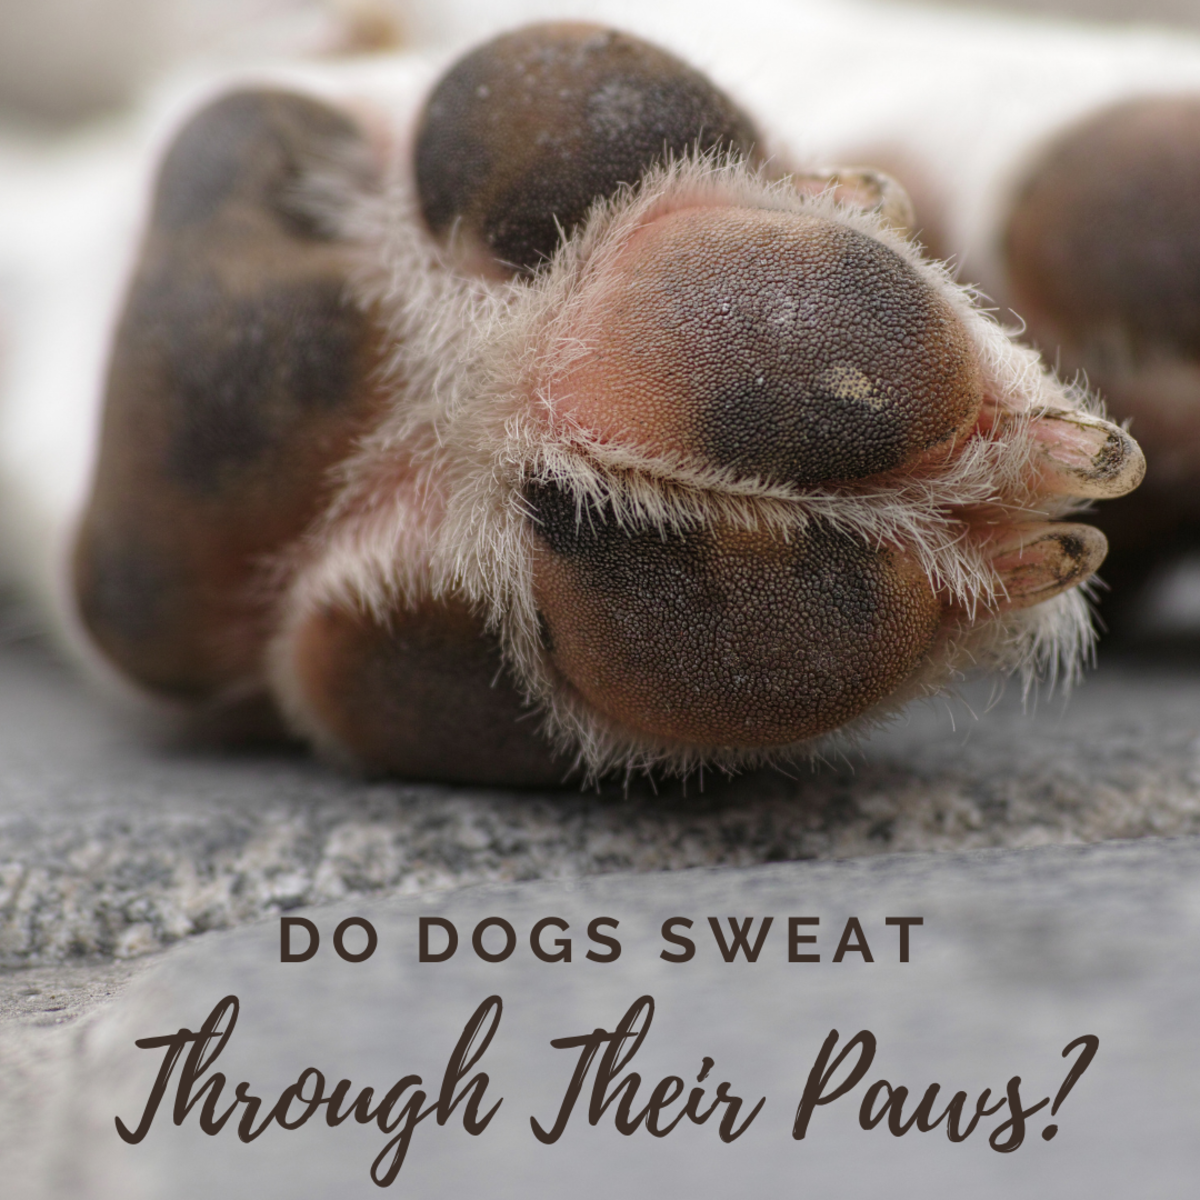 Do dogs have sweat glands in their paws yes or no?